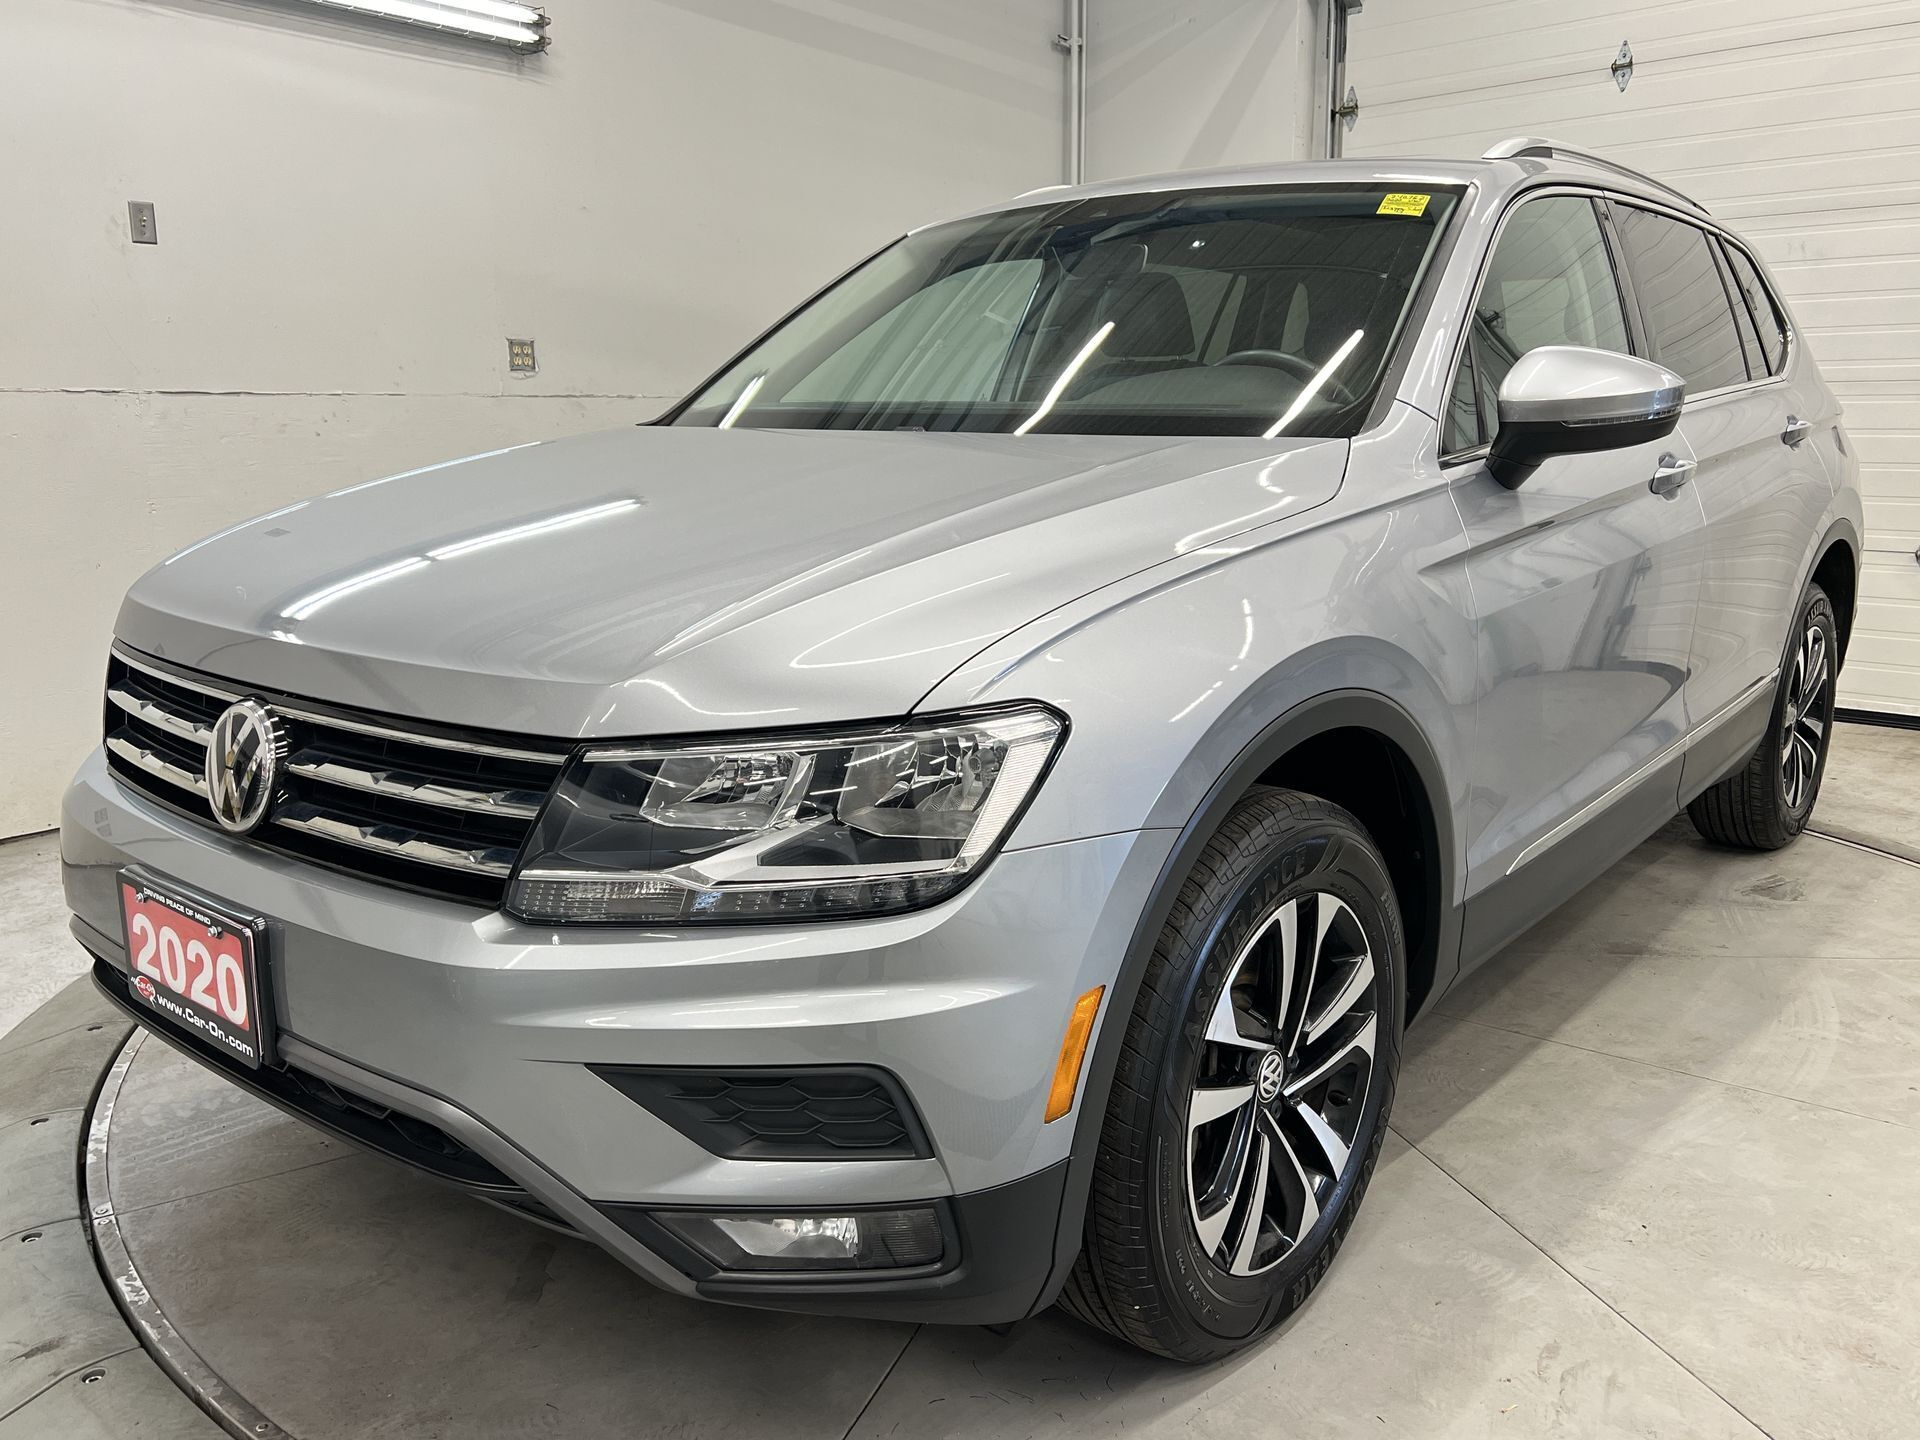 2020 Volkswagen Tiguan COMFORTLINE AWD | PANO ROOF |LOW KMS! |HTD LEATHER